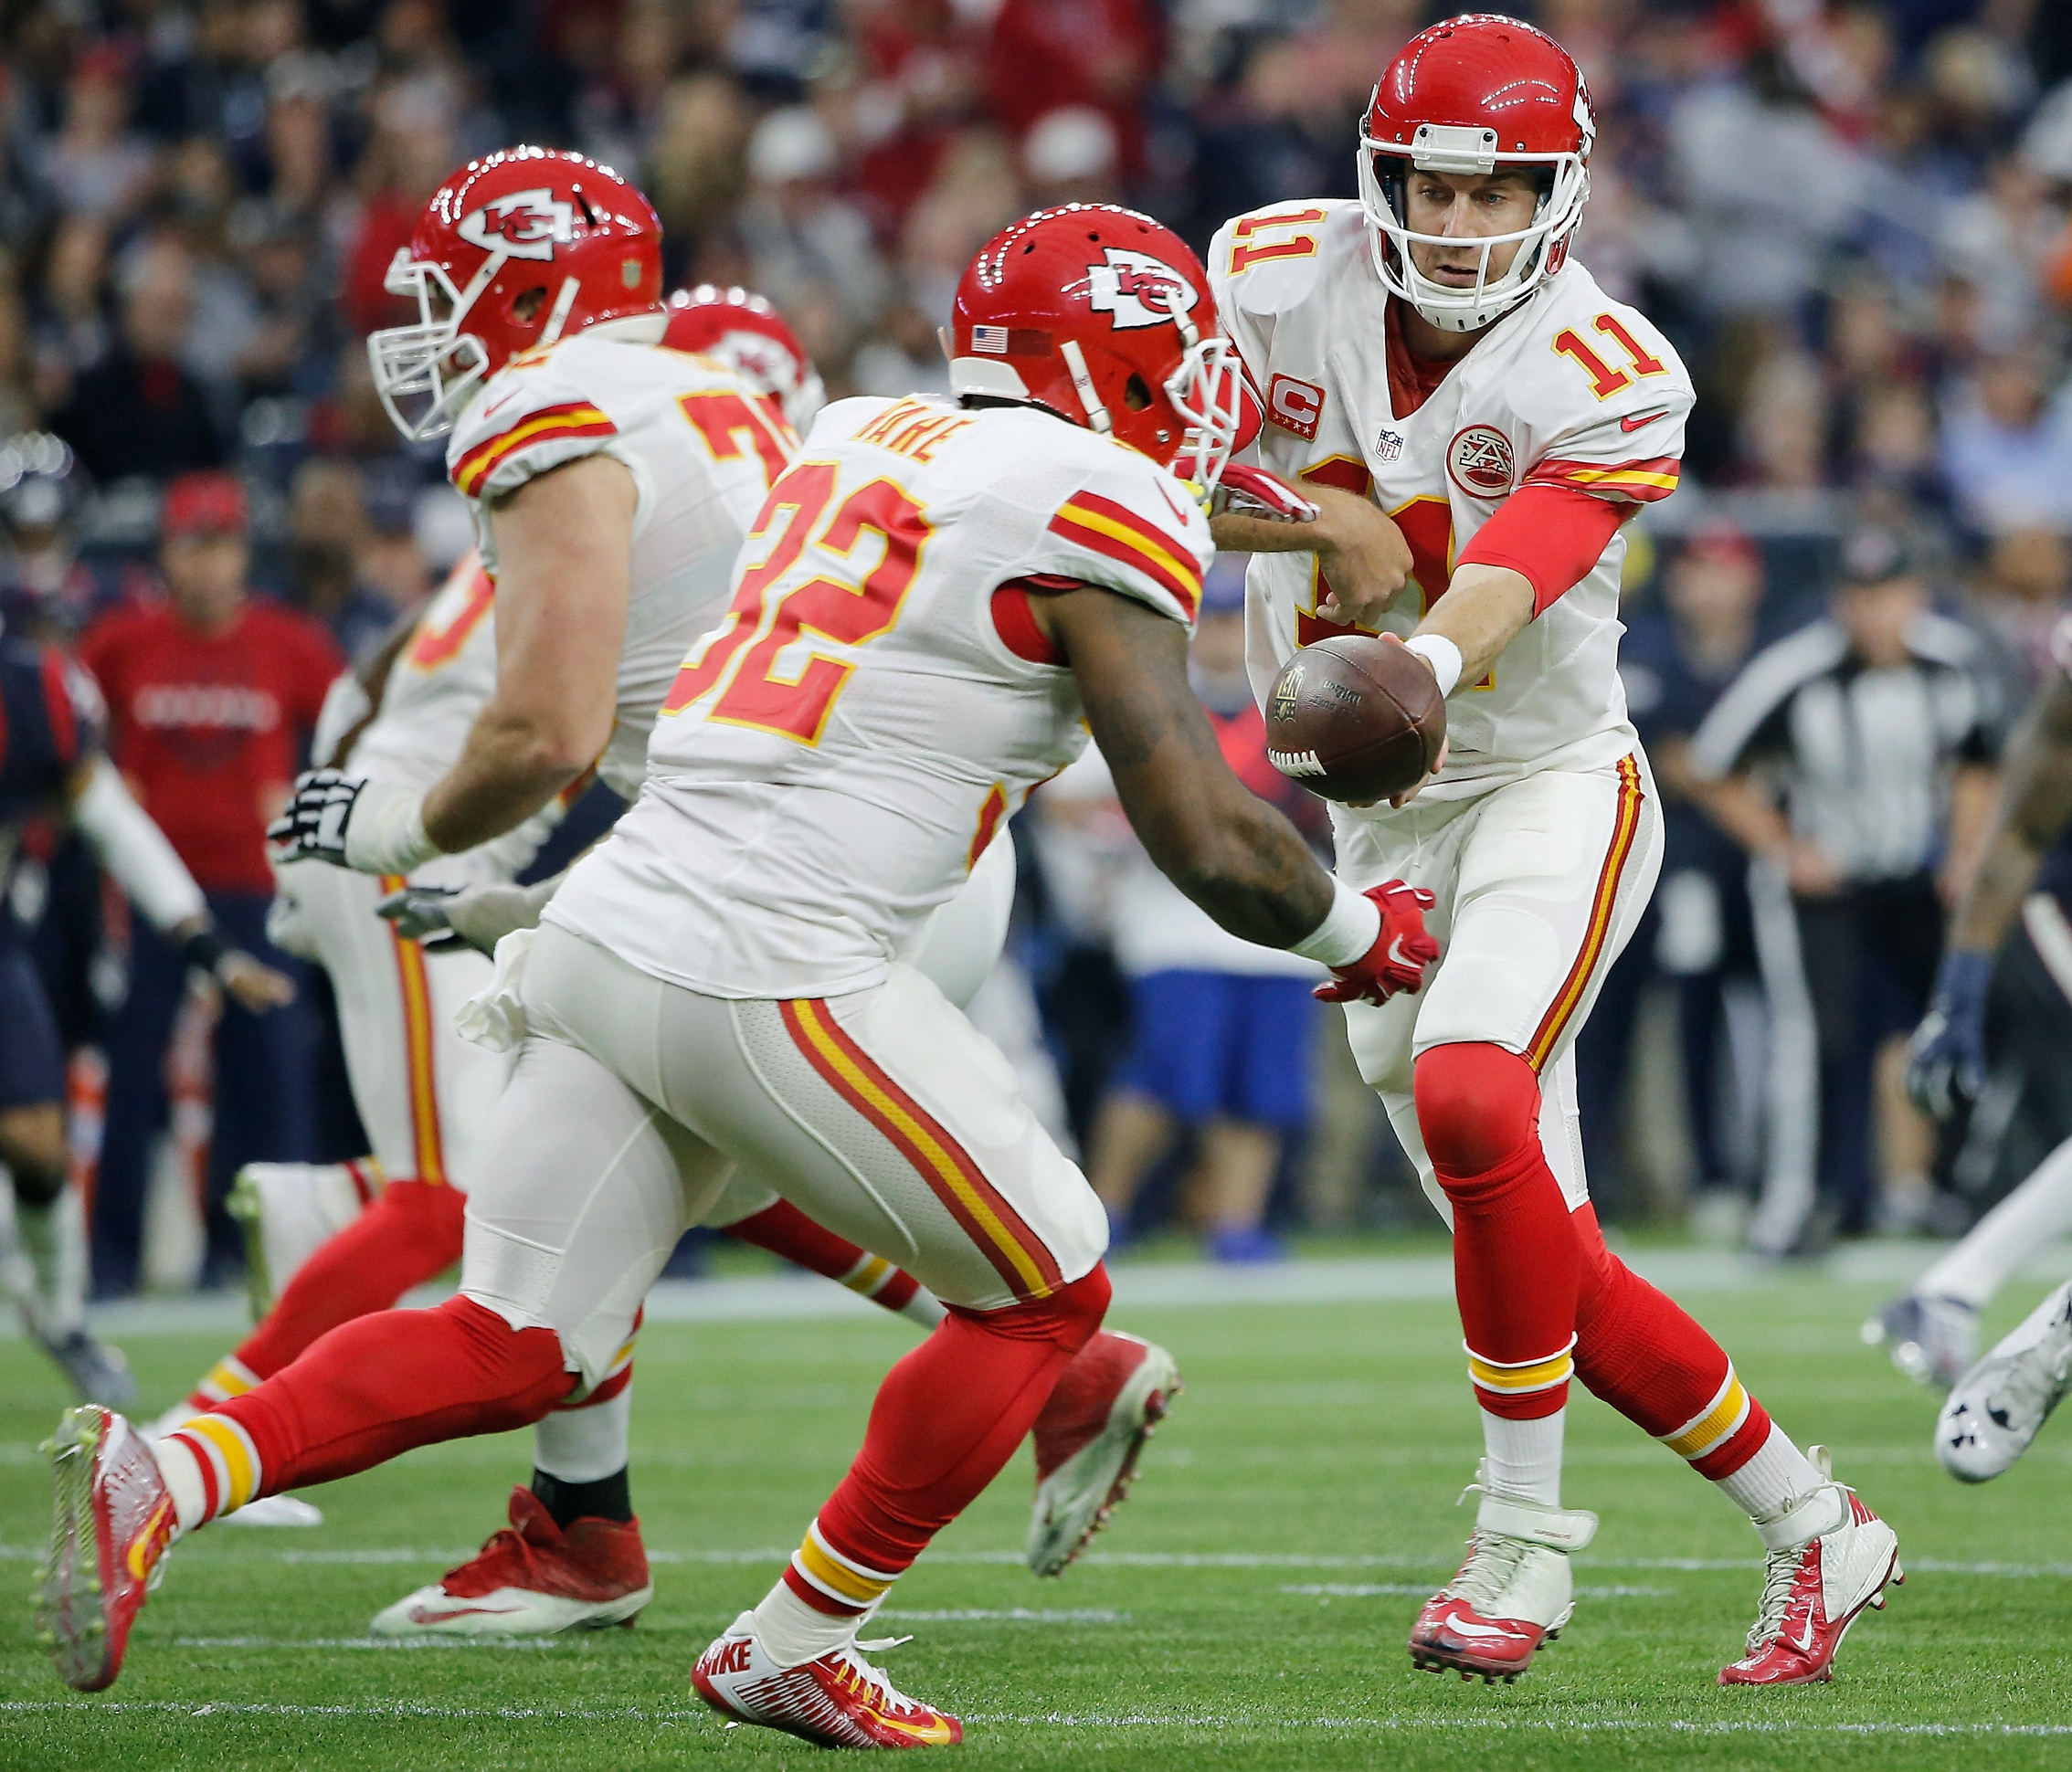 Alex Smith hands off to Spencer Ware. (Photo by Thomas B. Shea/Getty Images)